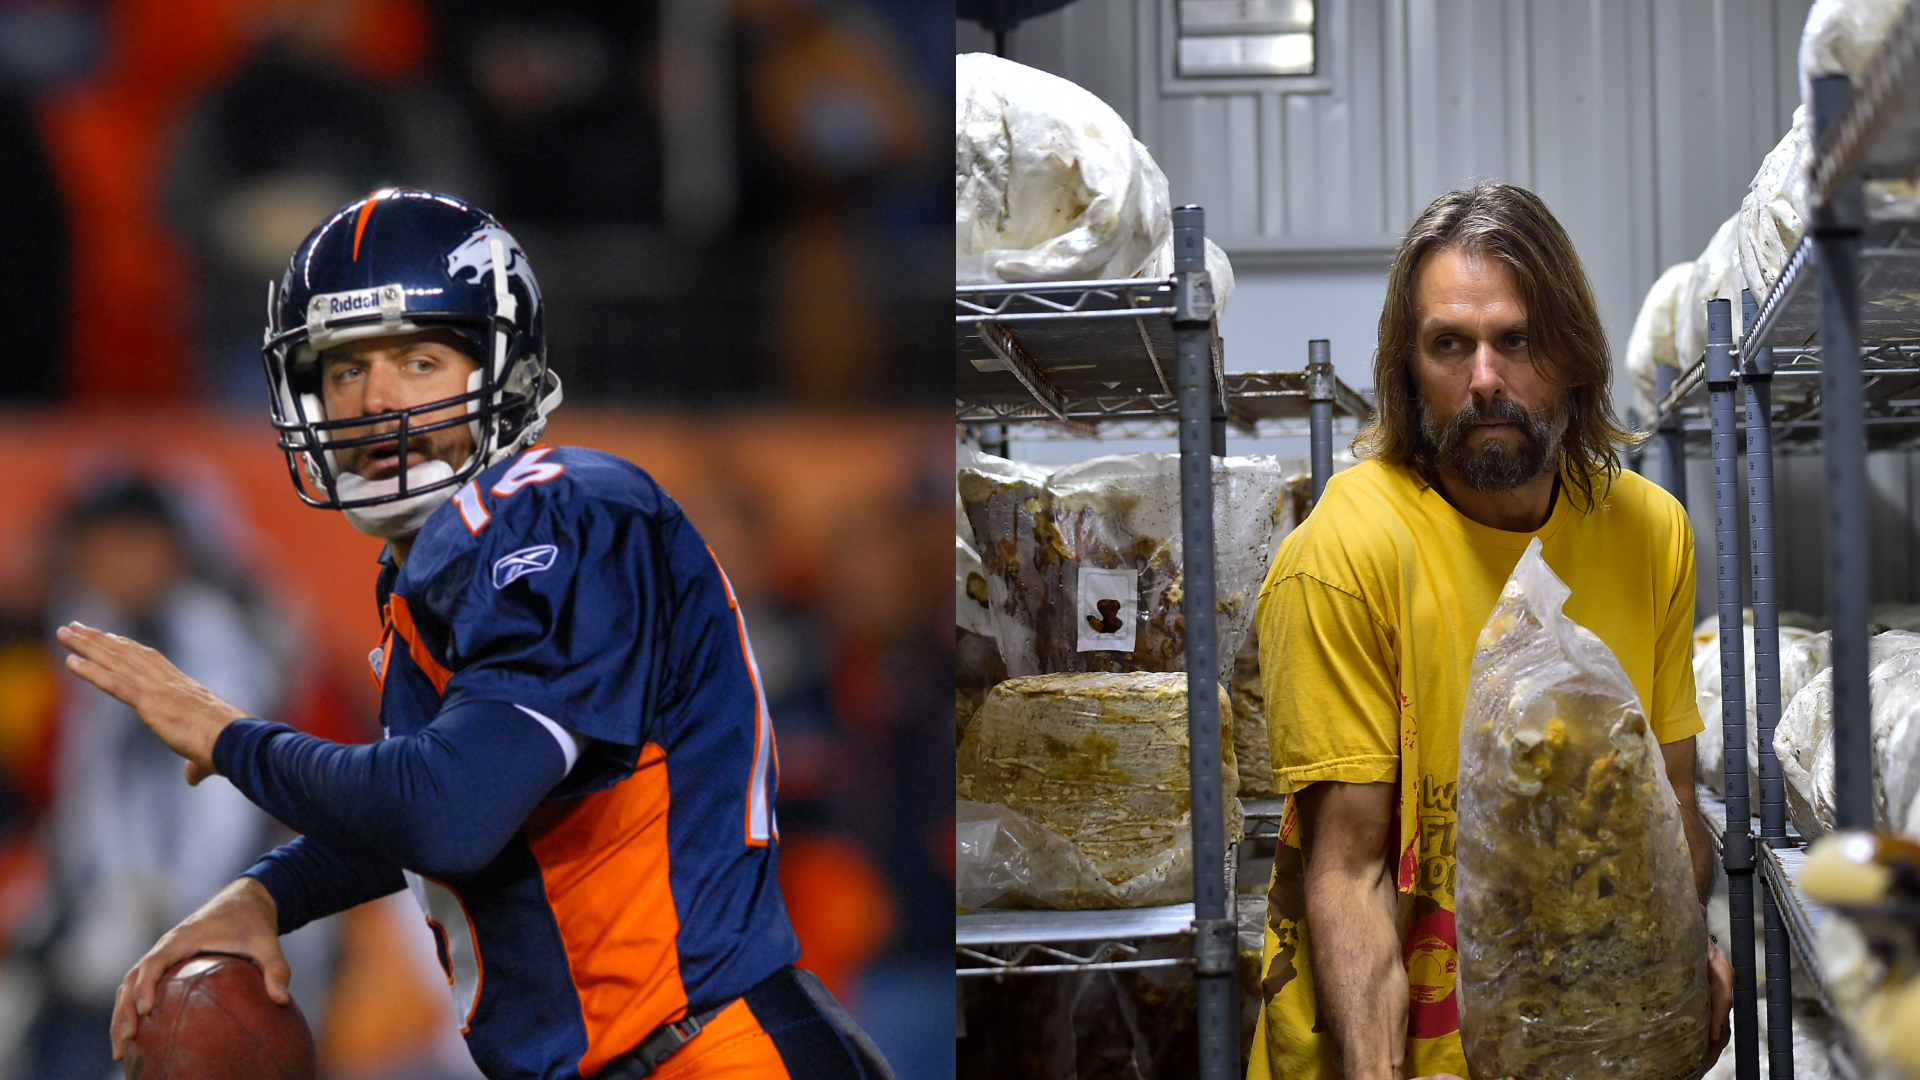 USA TODAY Sports on X: At Mycolove Farm, Jake Plummer does everything from  sweeping the floors to harvesting fully fruited mushrooms. For the former  Cardinals and Broncos QB, it's the perfect post-football